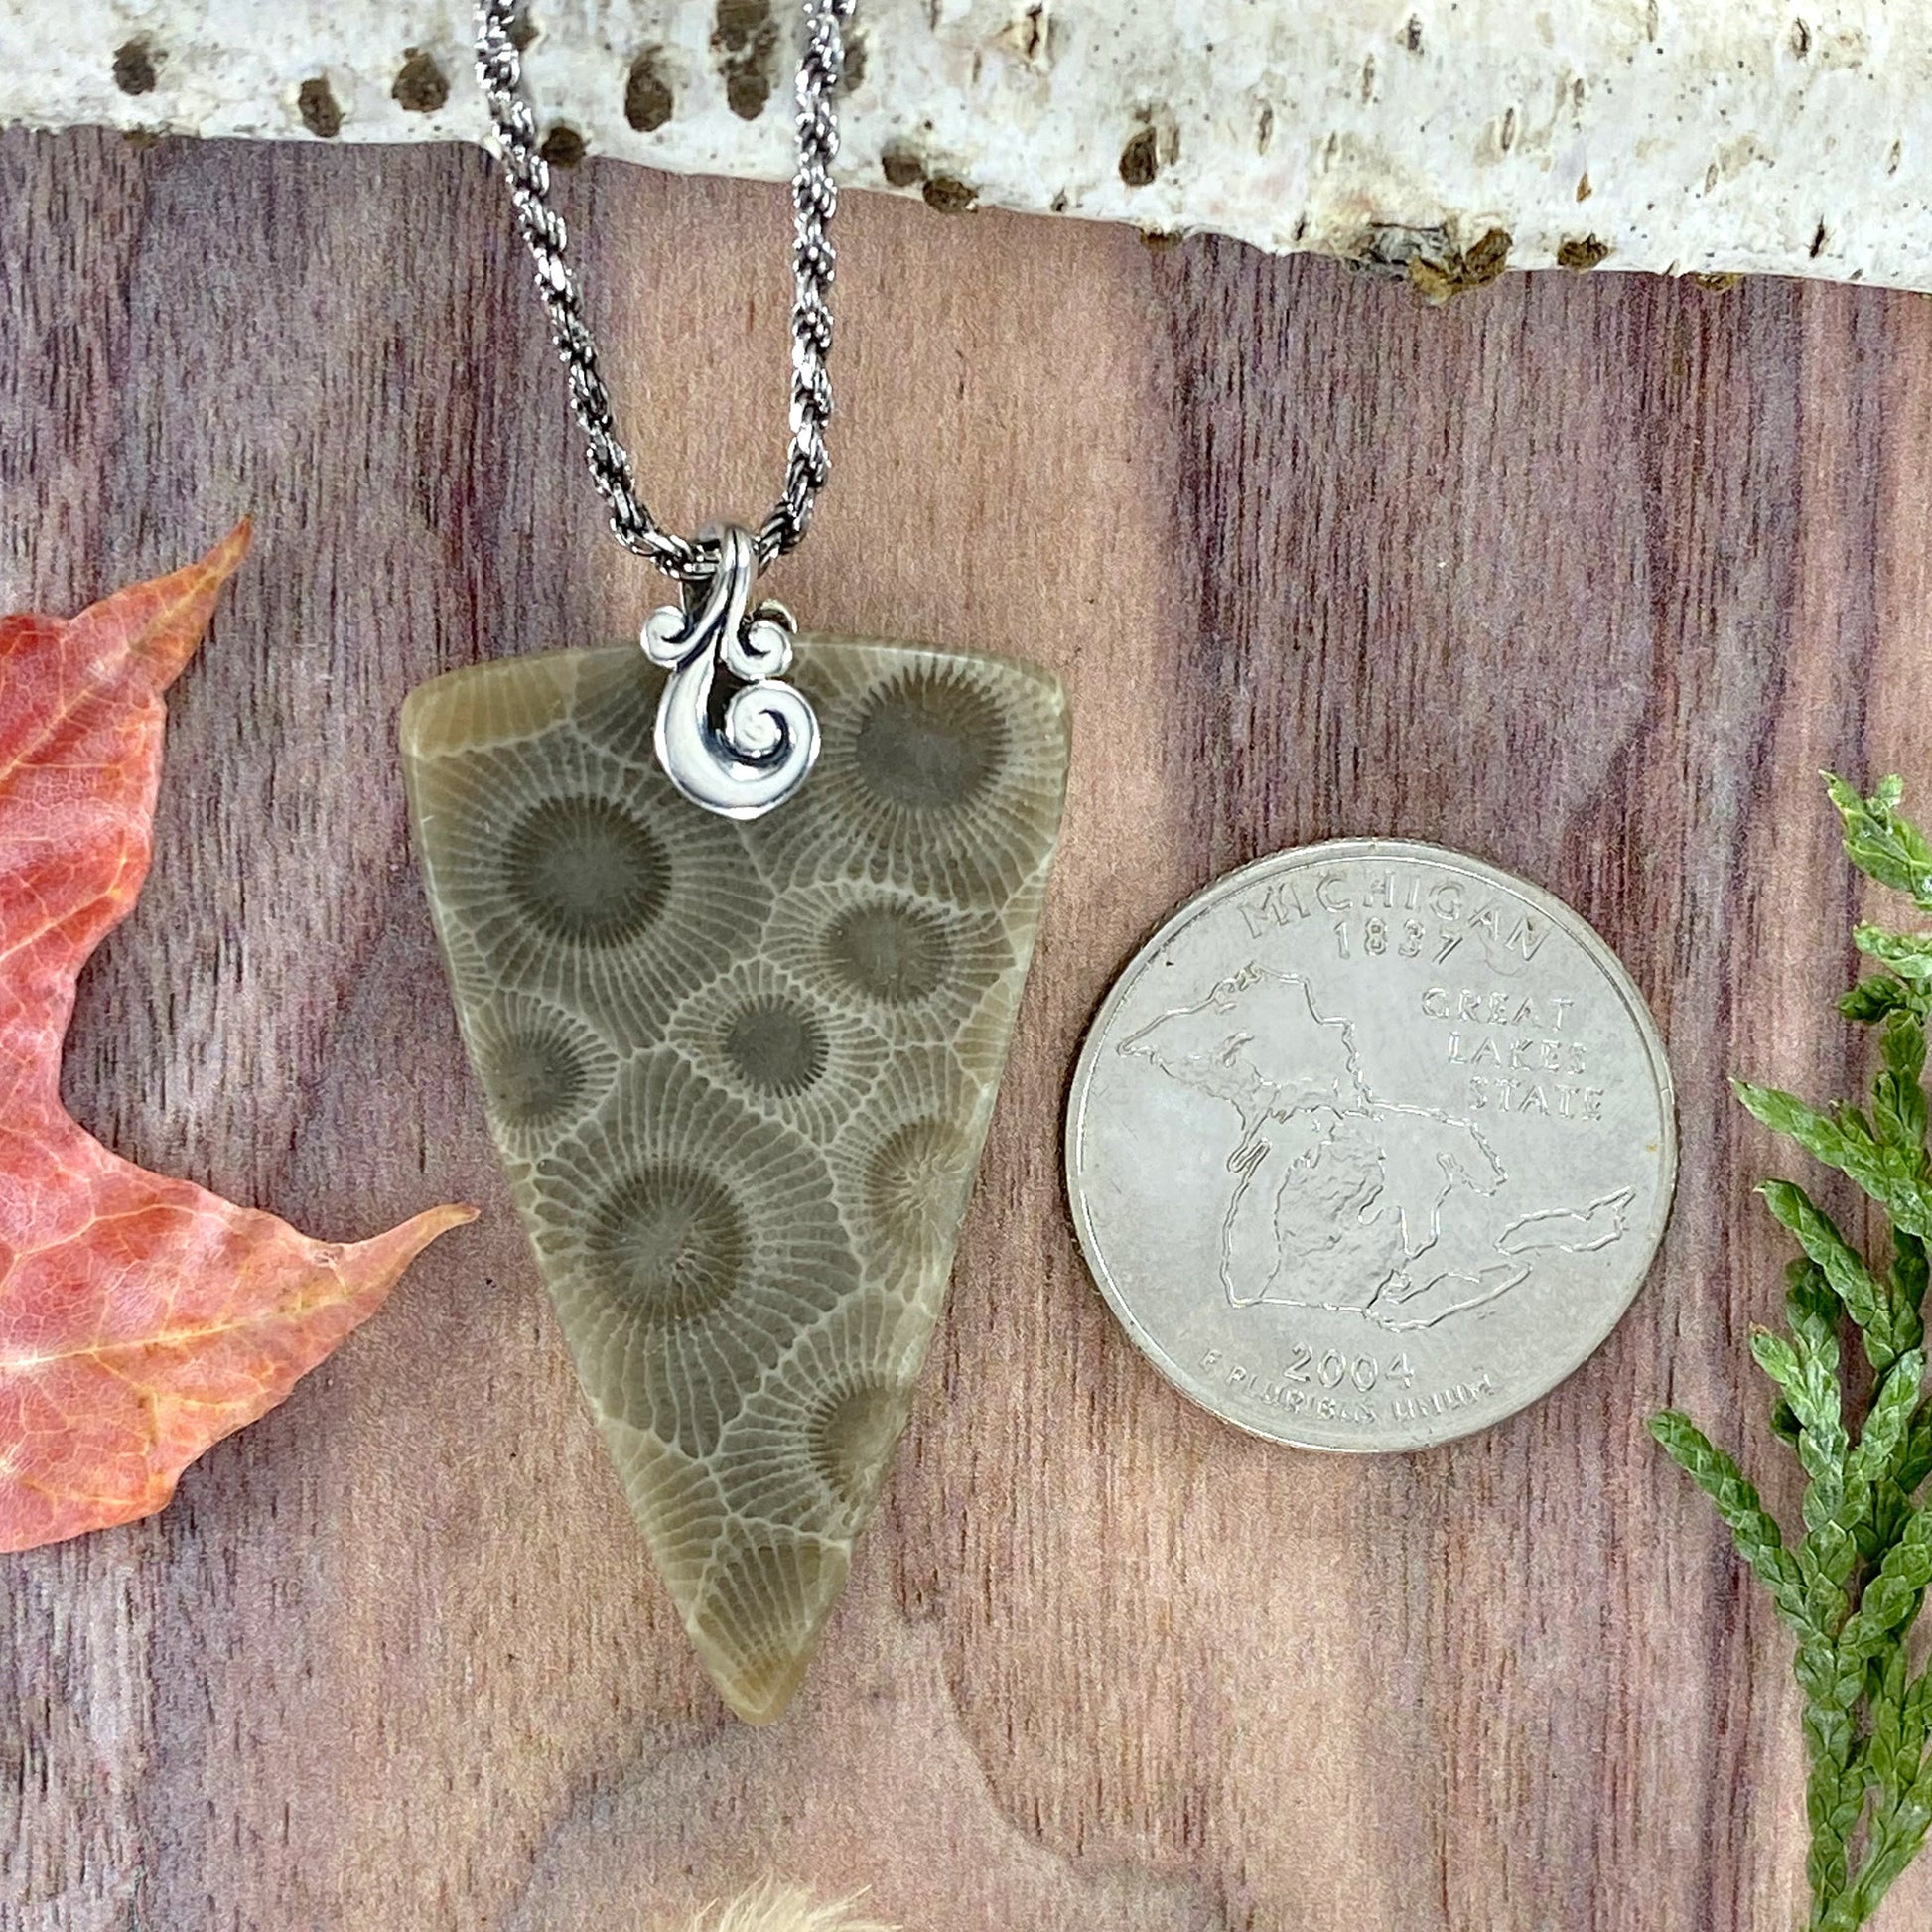 Petoskey Stone Pendant Necklace Back View - Stone Treasures by the Lake